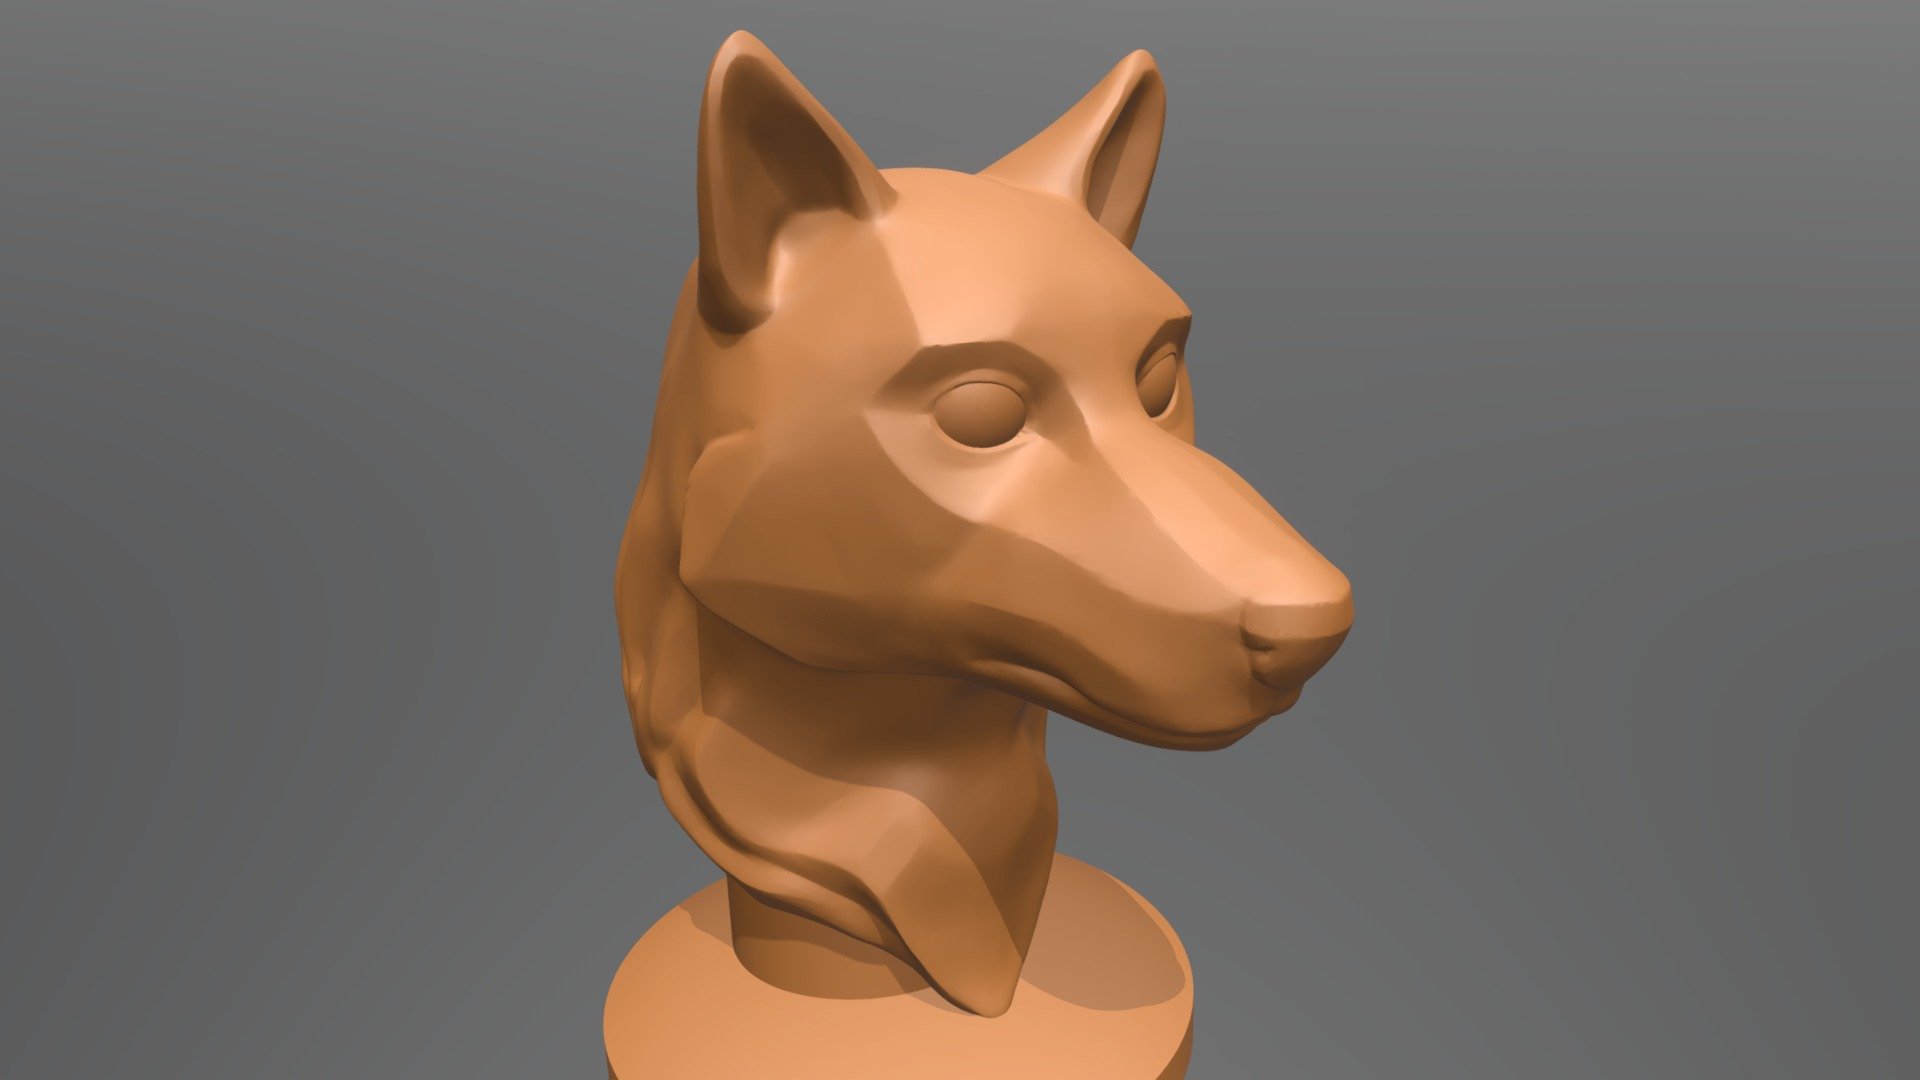 Primary/Secondary plane reference bust for a wolf. Intended as an art reference for drawing/traditional sculpting 3d model